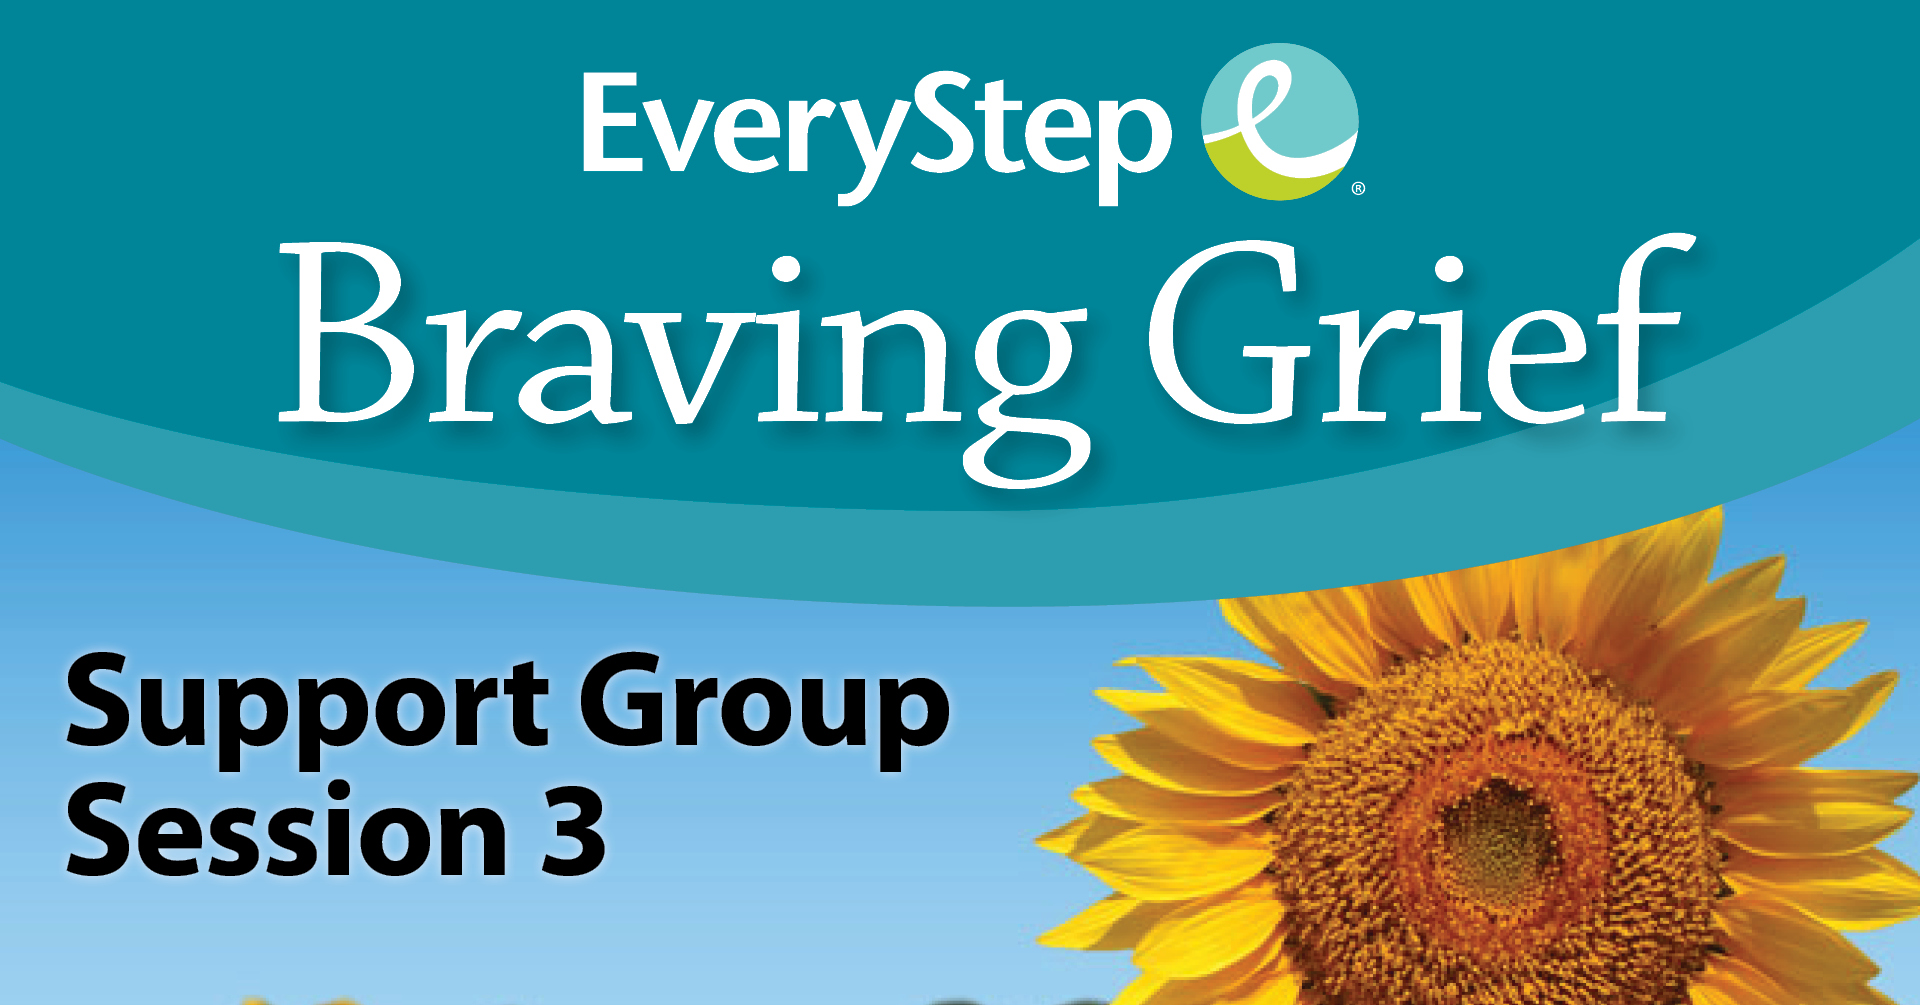 Braving Grief Support Group